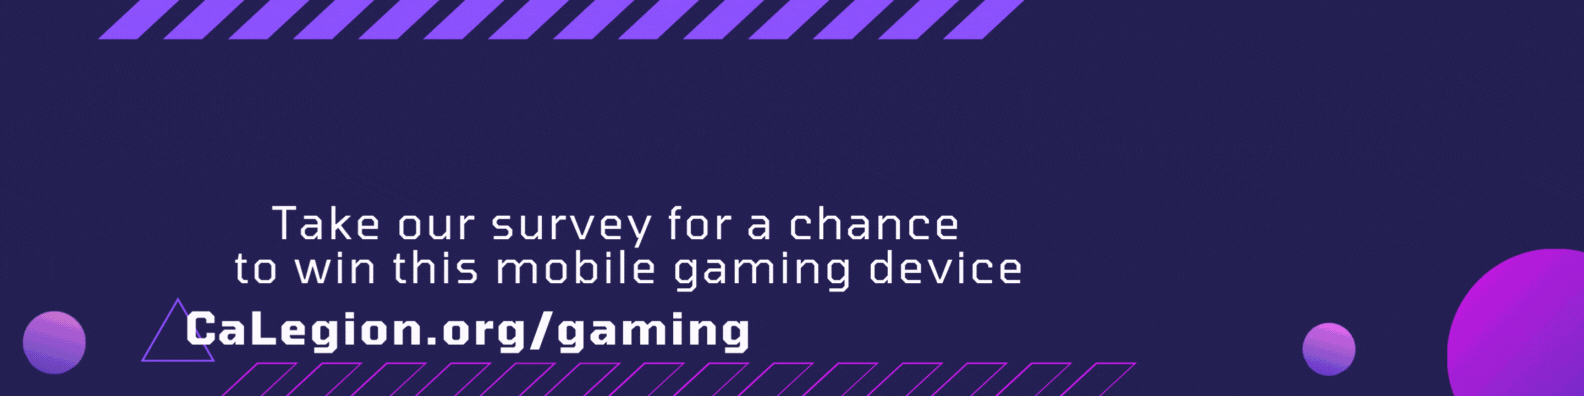 "Win a backbone mobile gaming device" animated banner